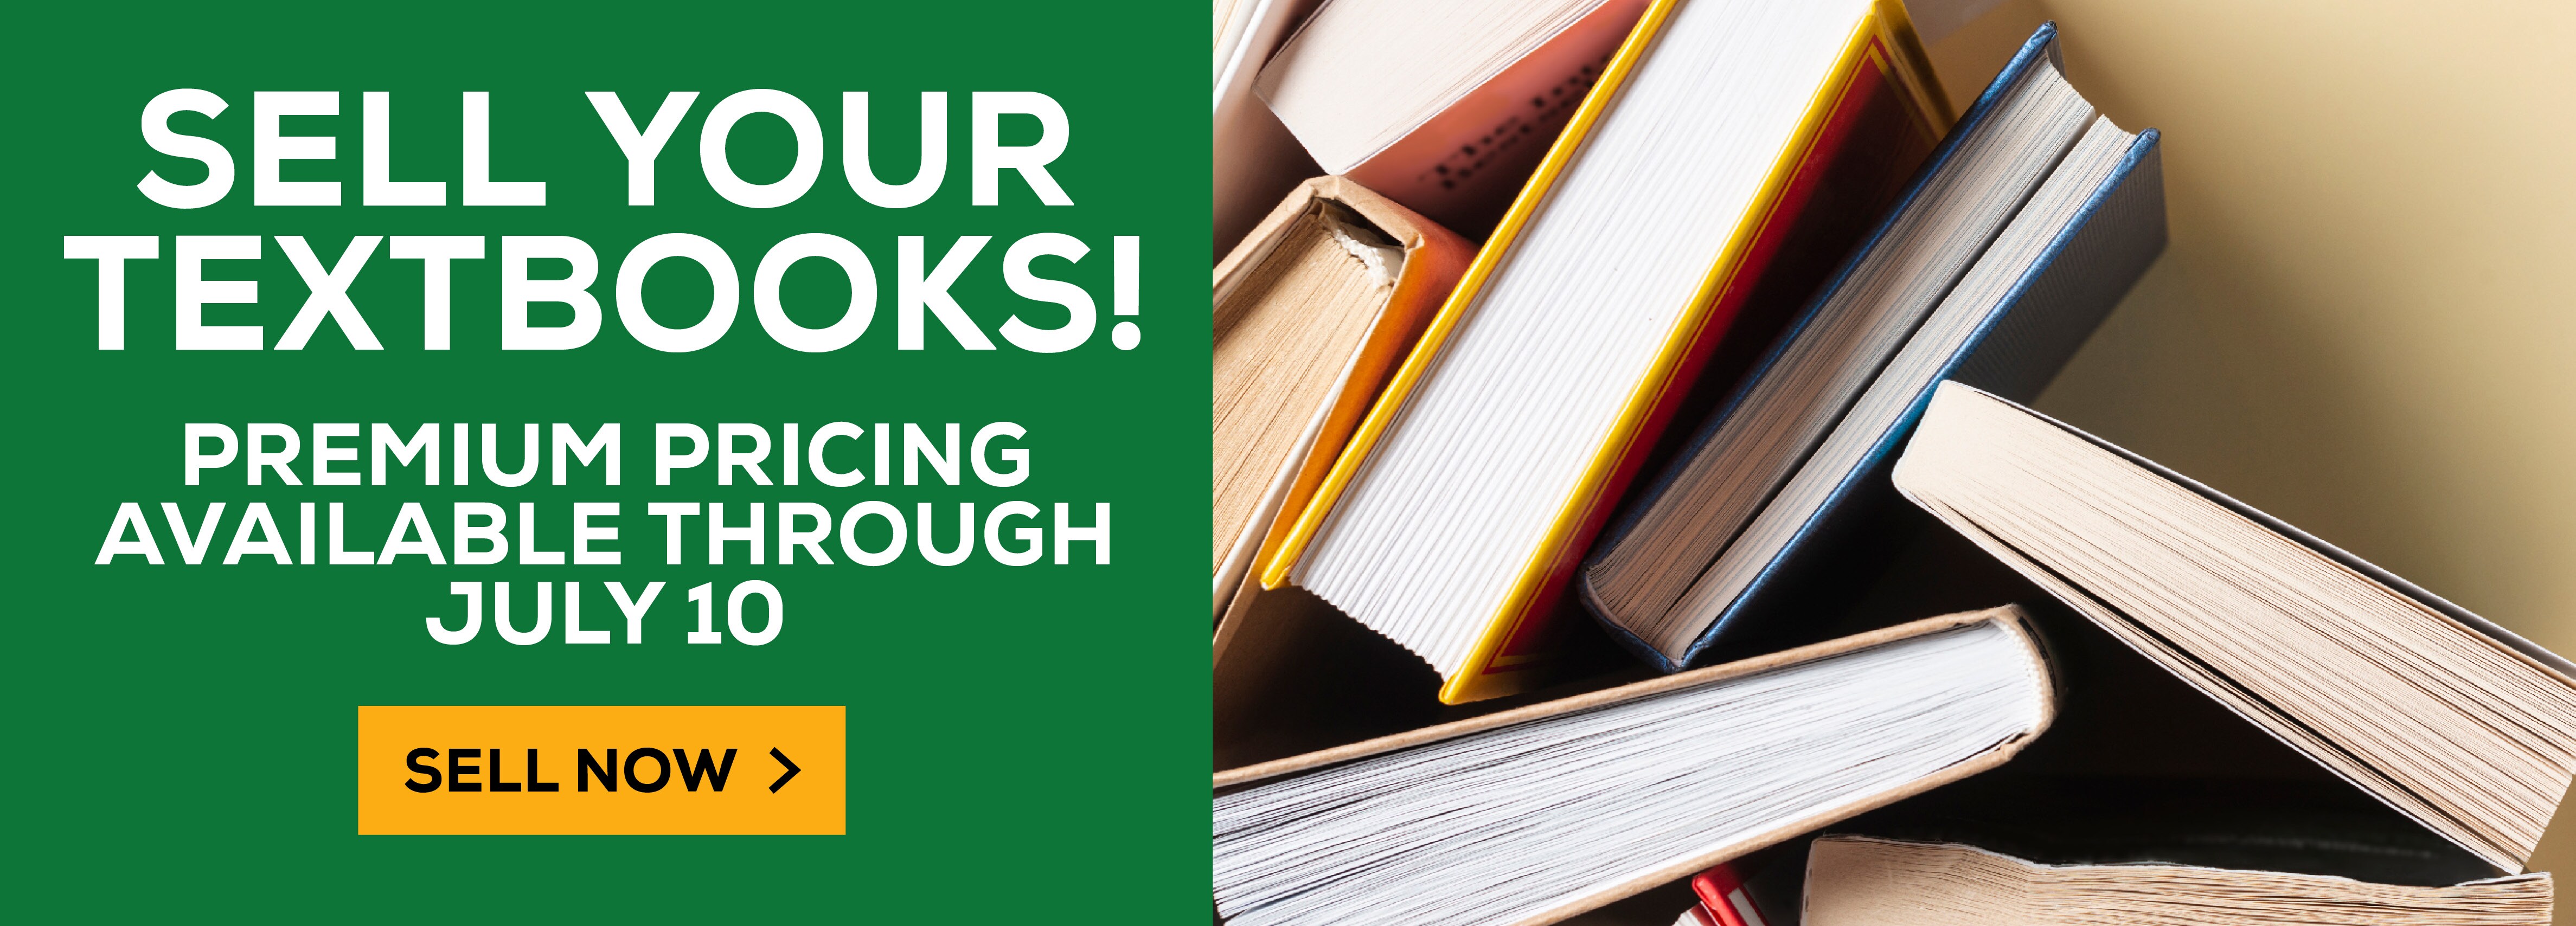 Sell Your Textbooks! Premium pricing available through July 10. Sell Now!					